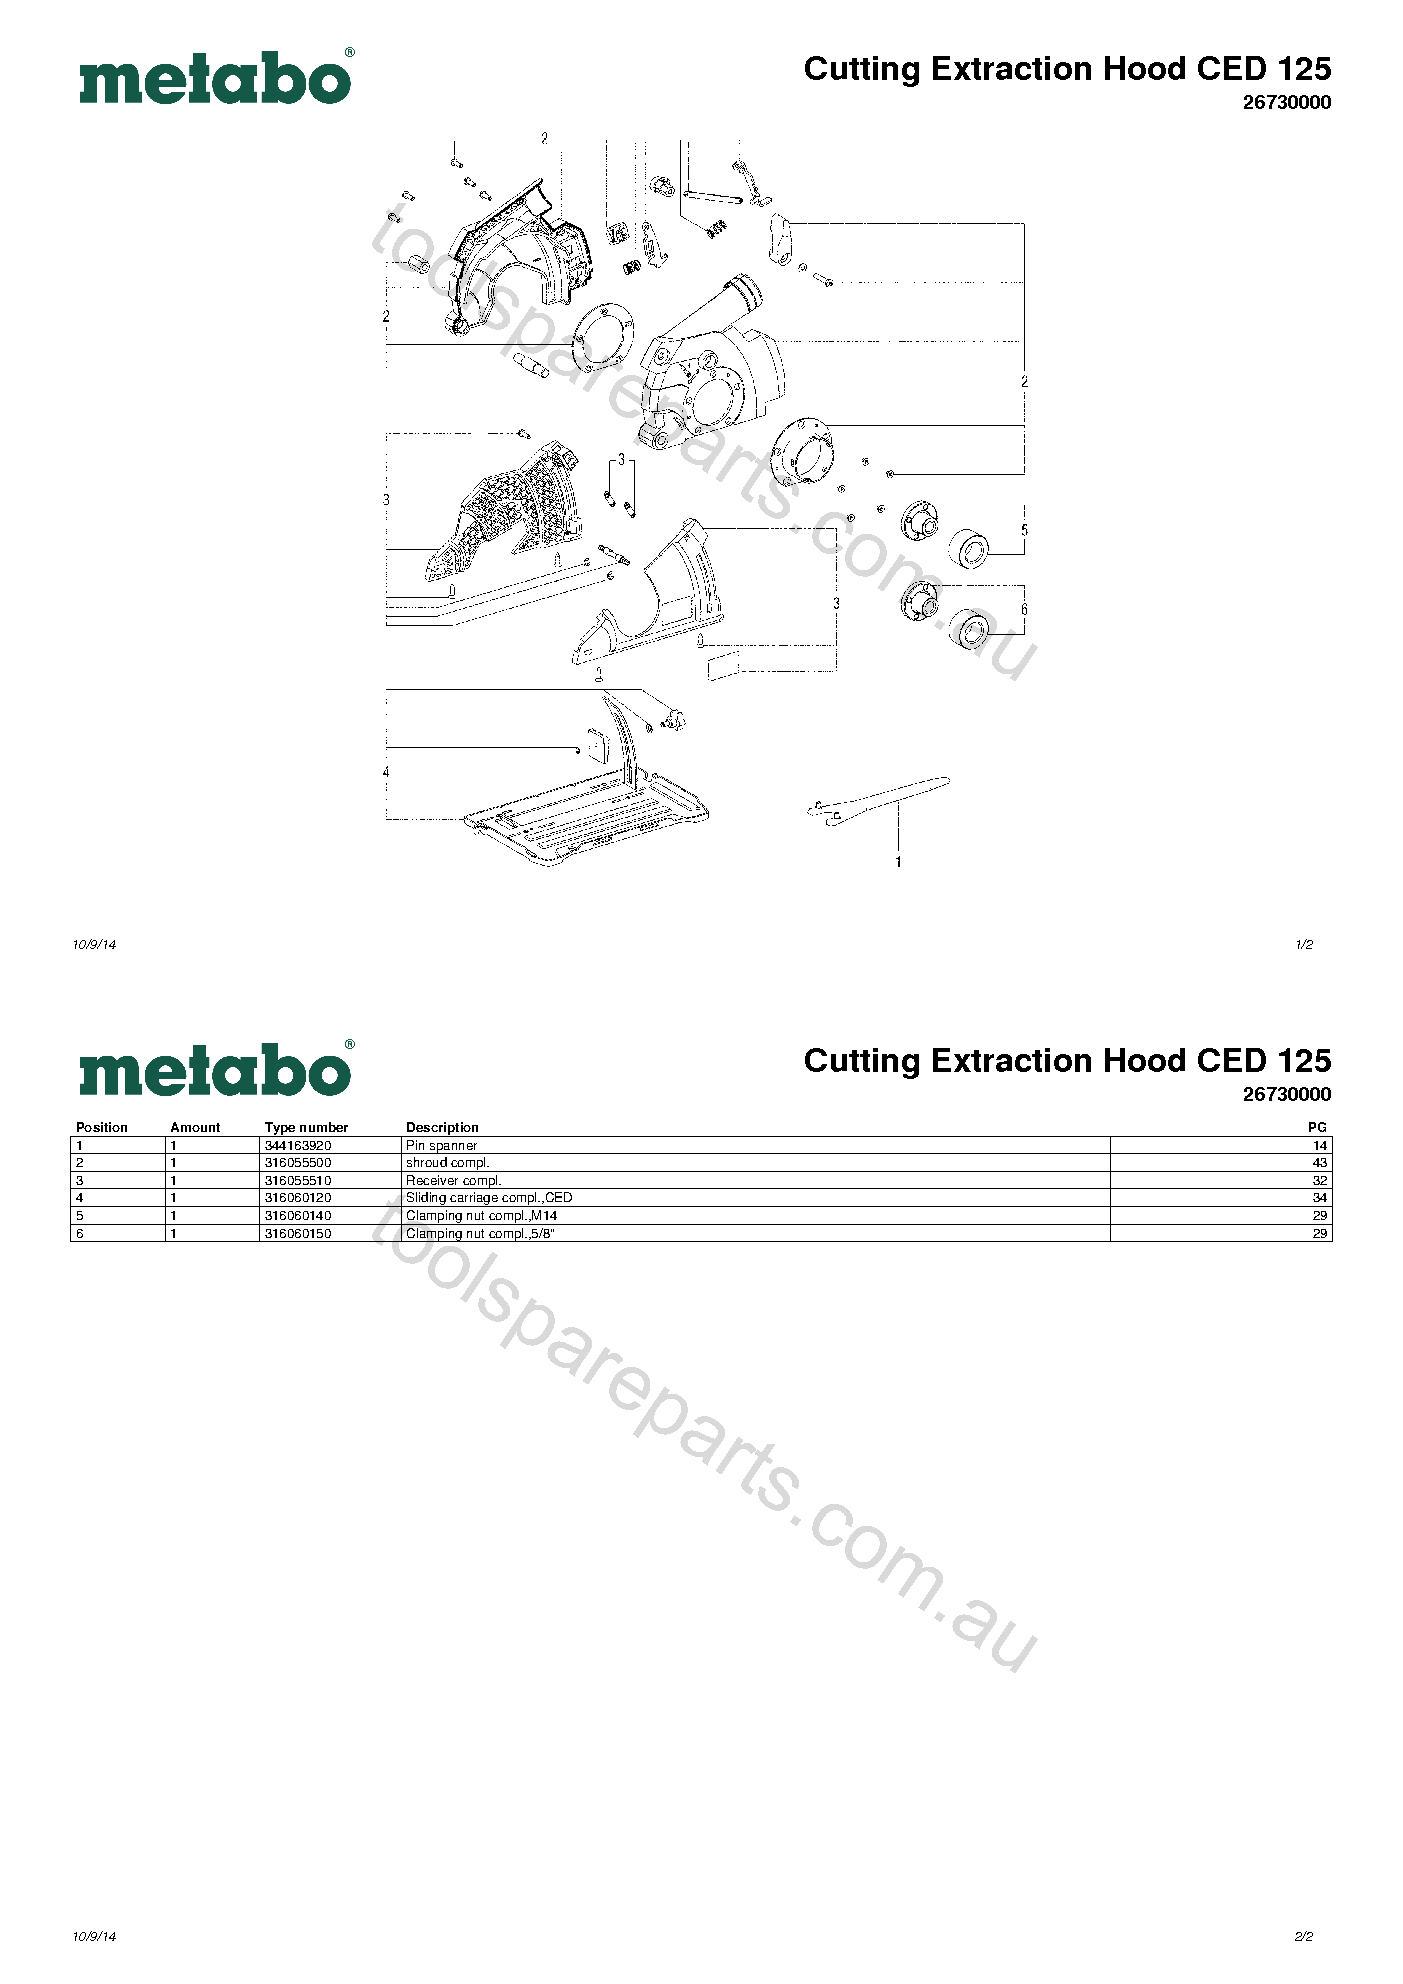 Metabo Cutting Extraction Hood CED 125 26730000  Diagram 1